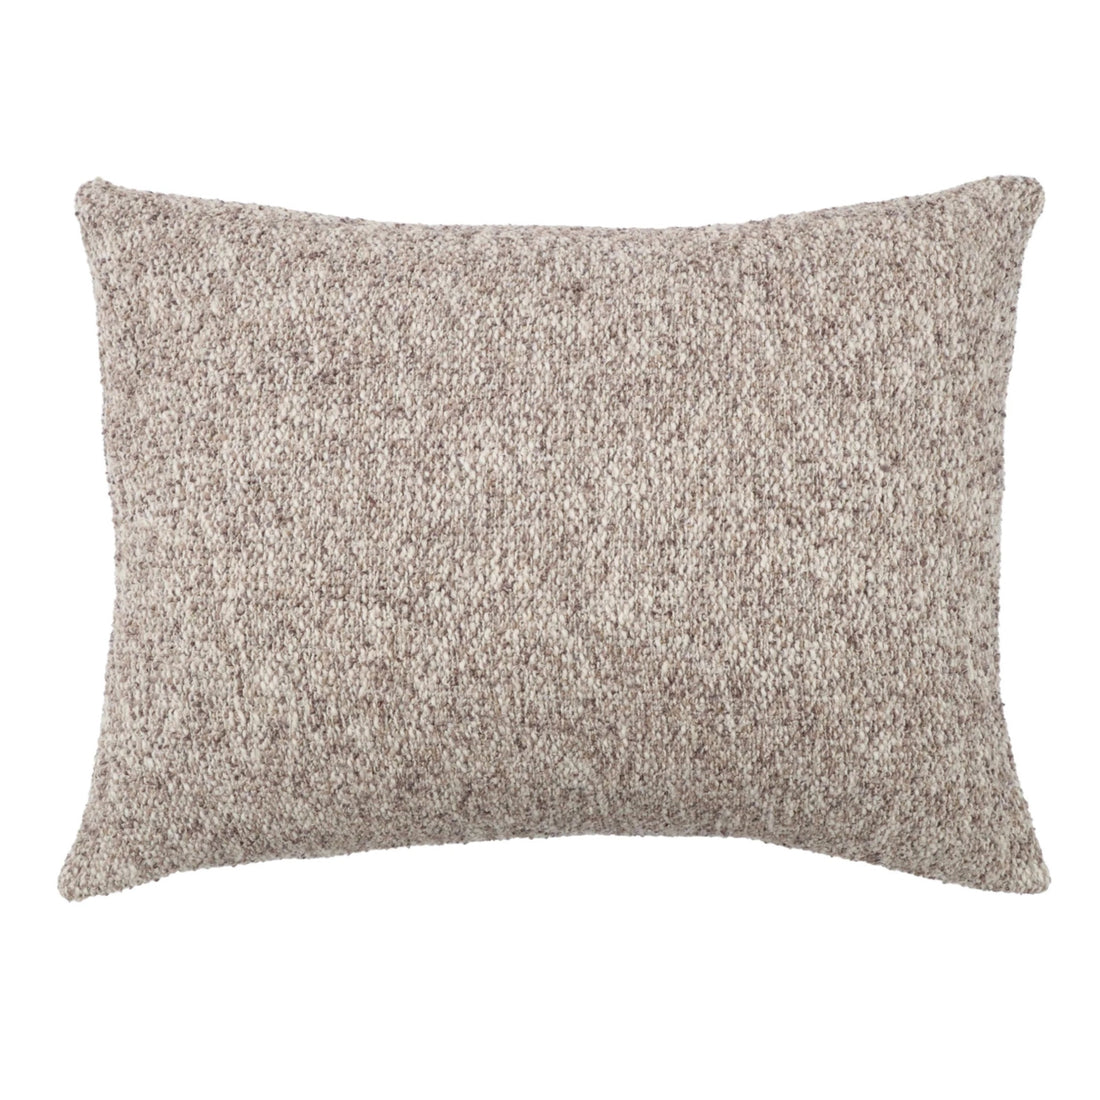 Brentwood Pillow, Pebble